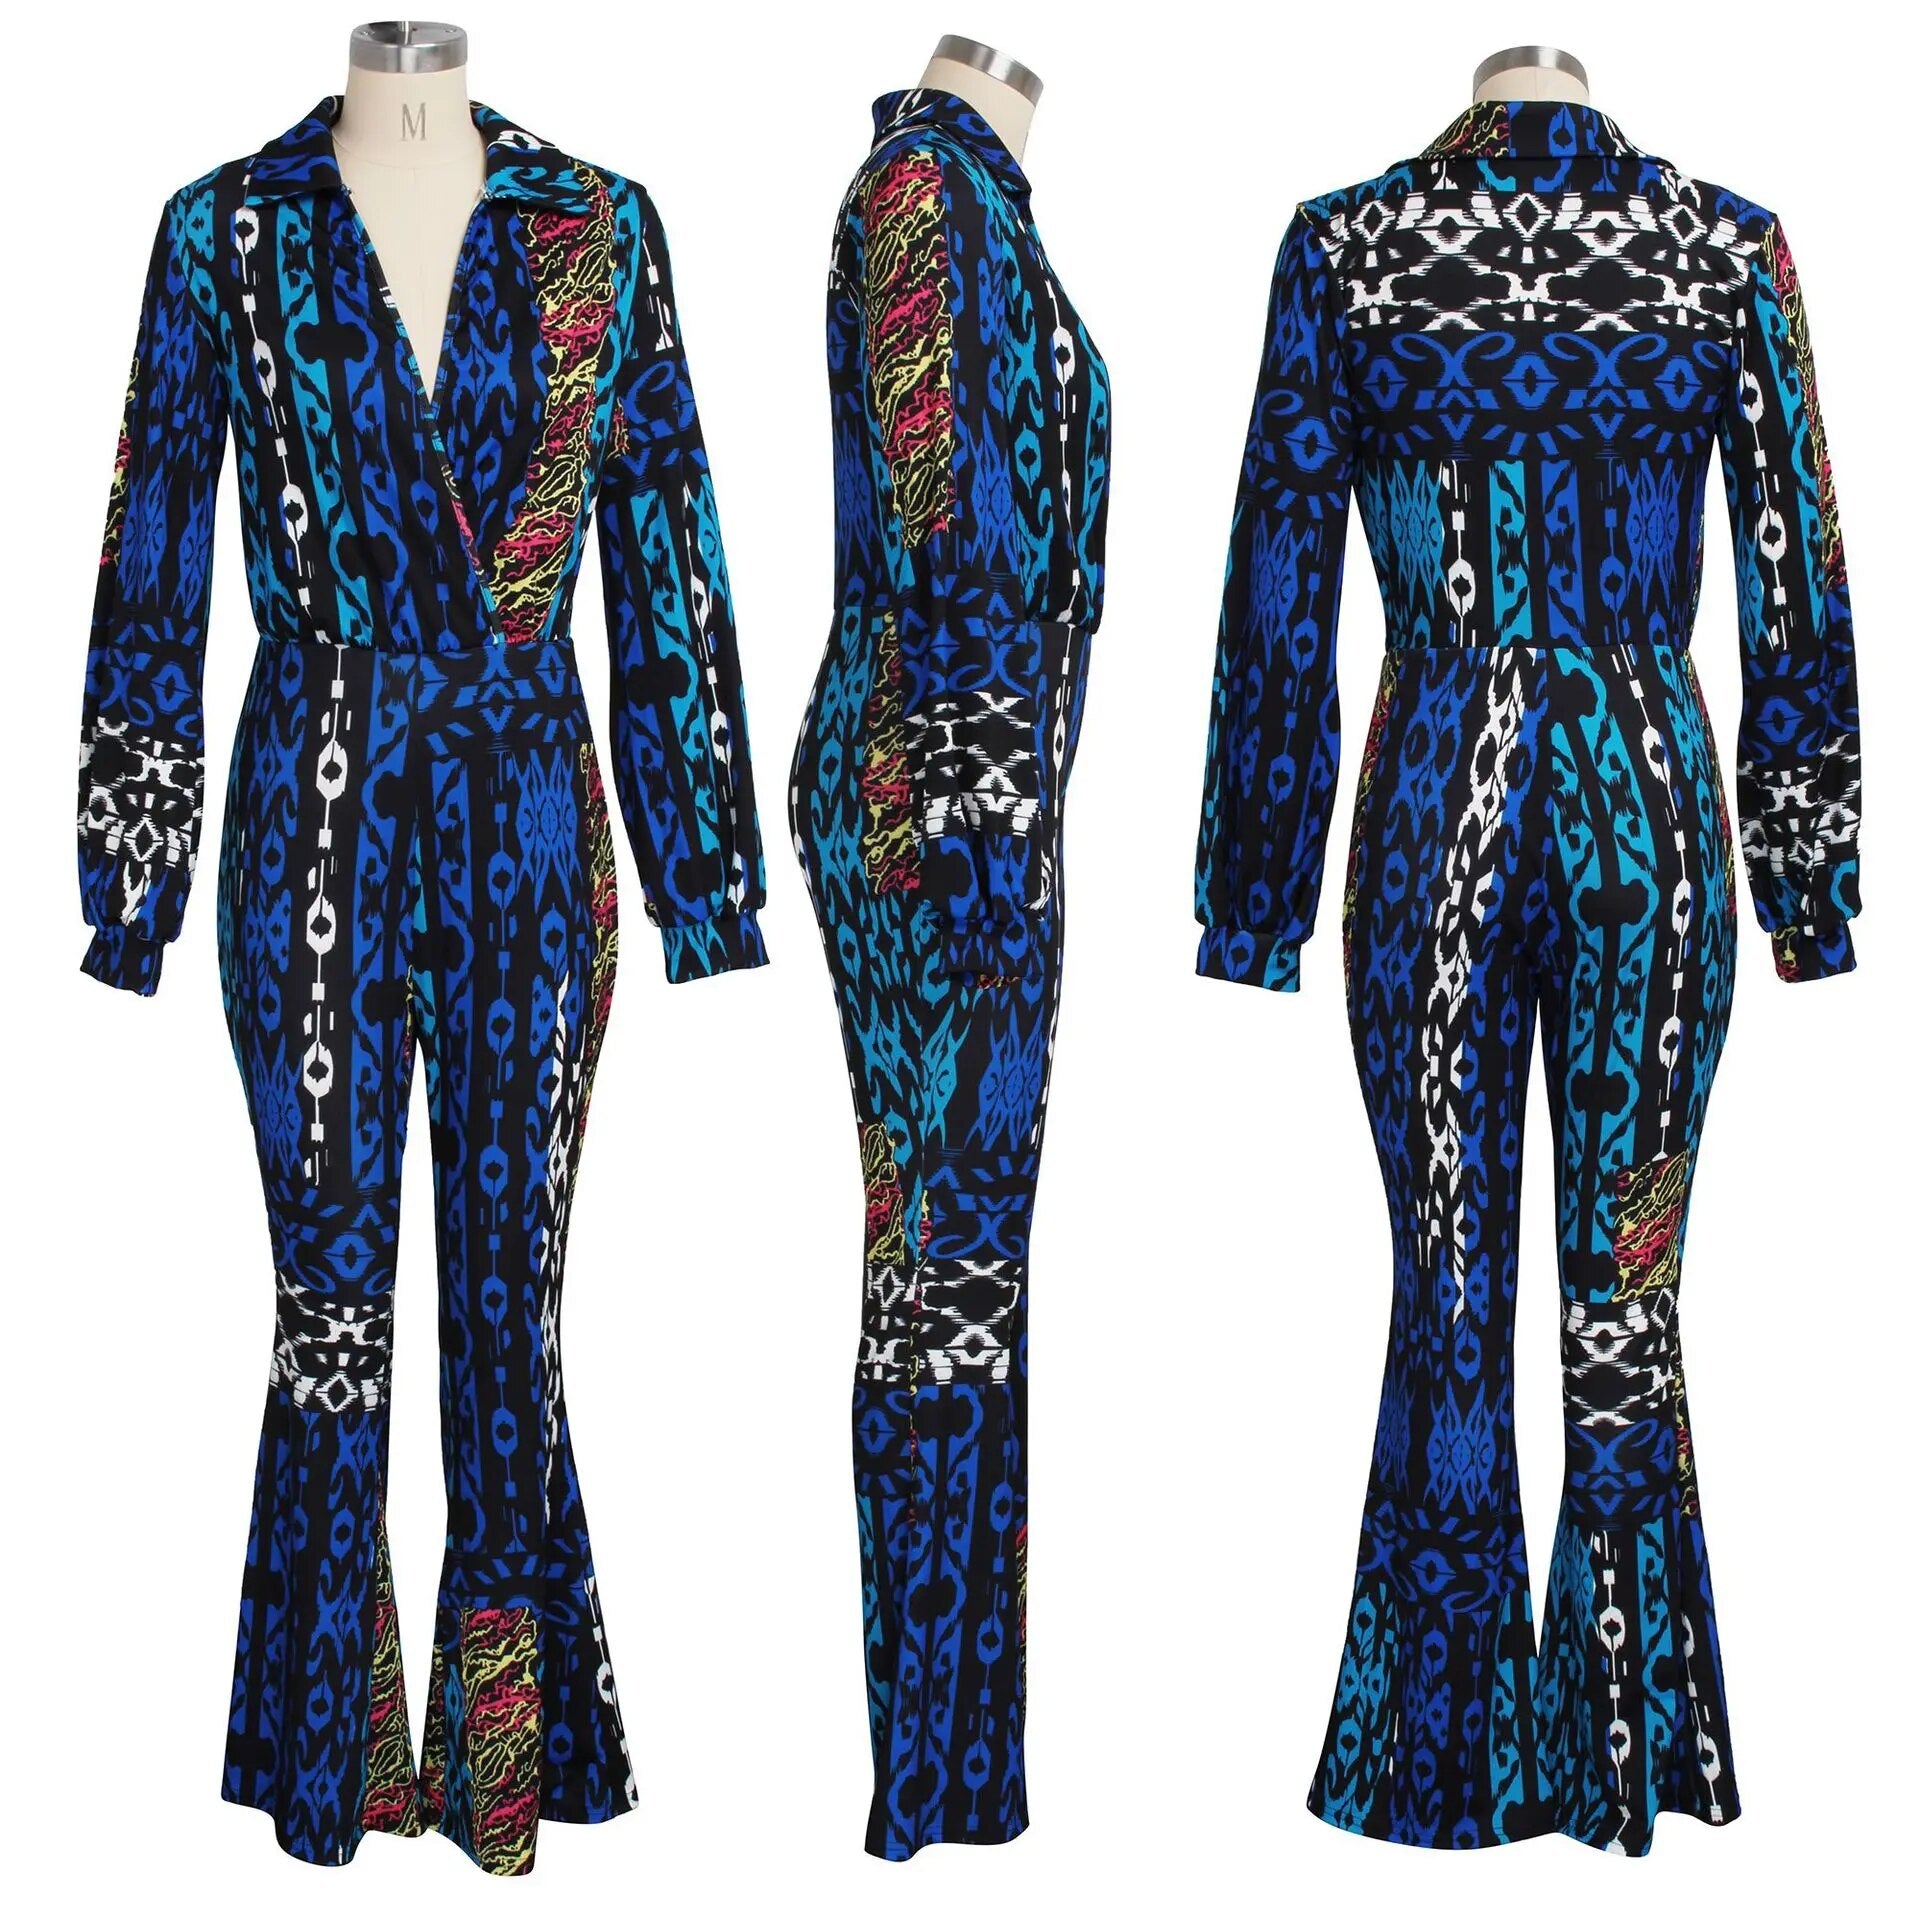 Leopard Print Turn-down Neck Long Sleeve Jumpsuits - Forever Growth 